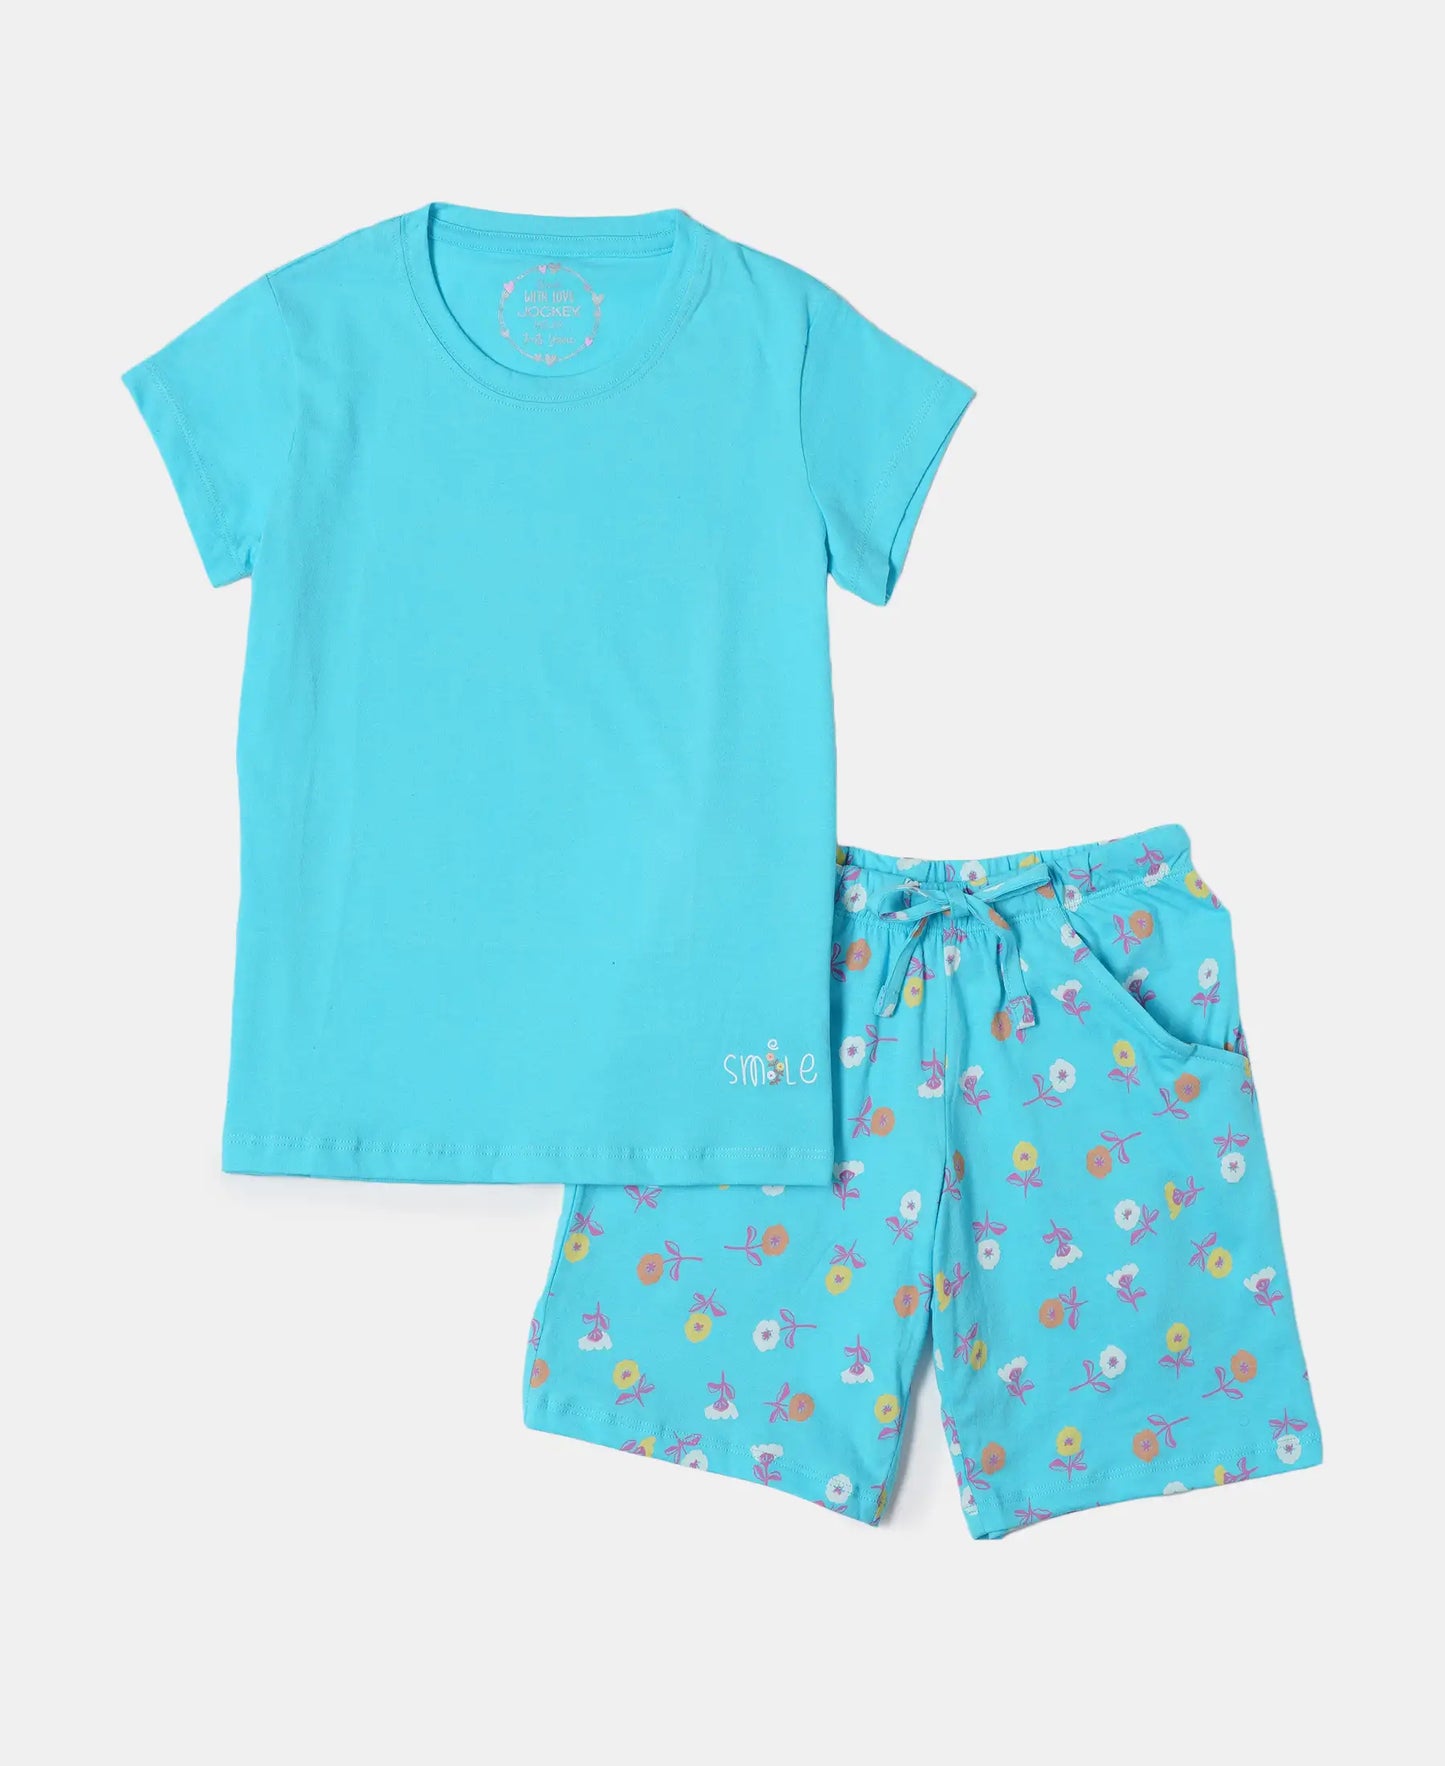 Super Combed Cotton Short Sleeve T-Shirt and Printed Shorts Set - Blue Curacao